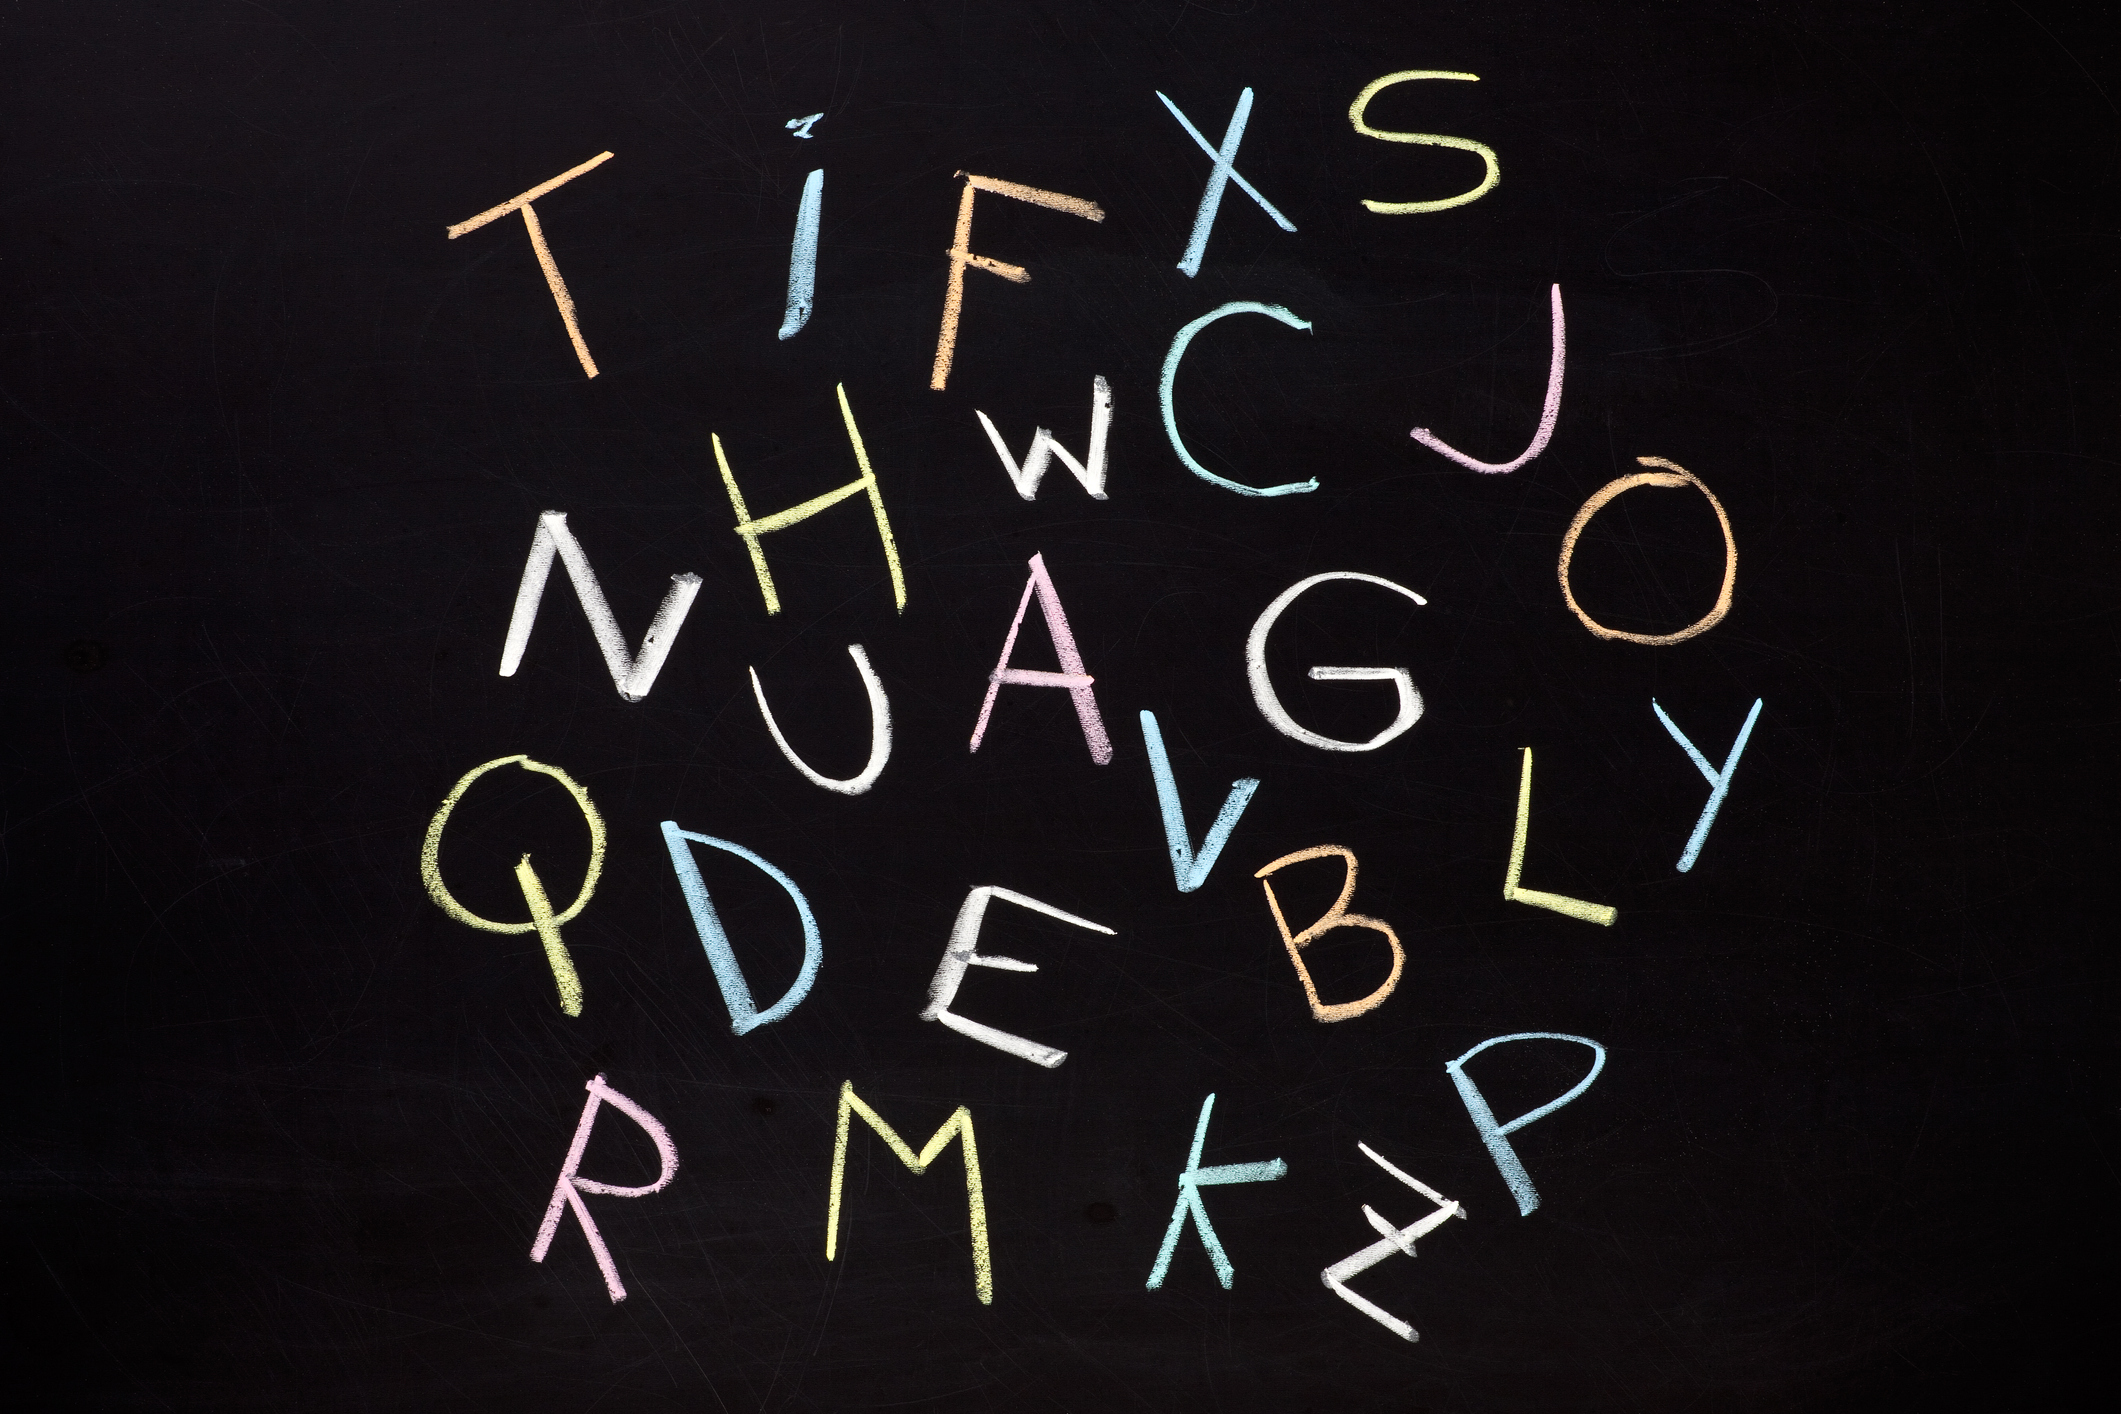 The letters of the alphabet drawn in blackboard without any particular order